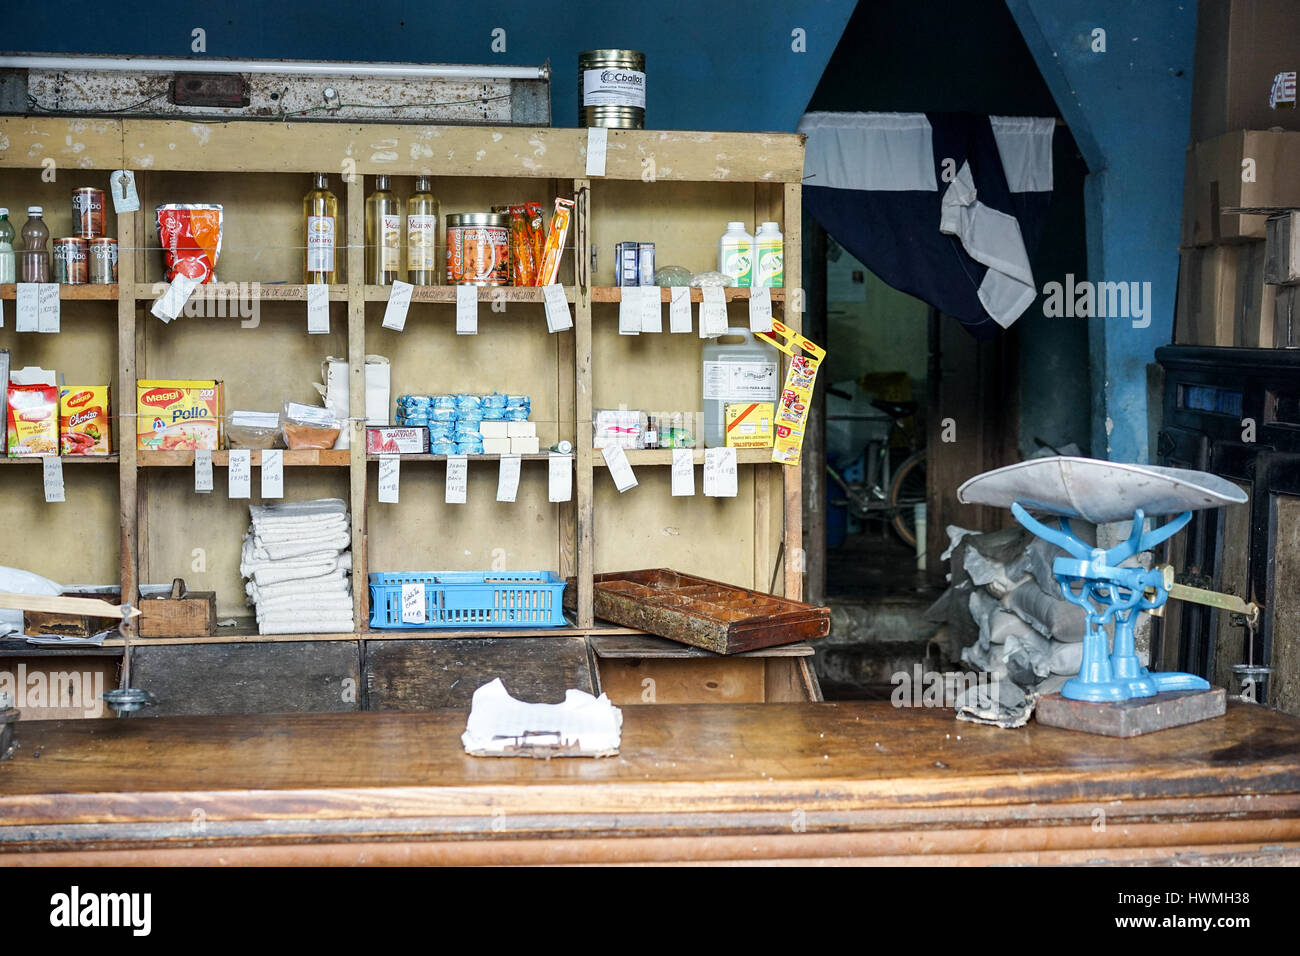 Trinidad, Cuba - January 13, 2016: shop with products for sale at government store, bodega, where ration cards are used, Stock Photo